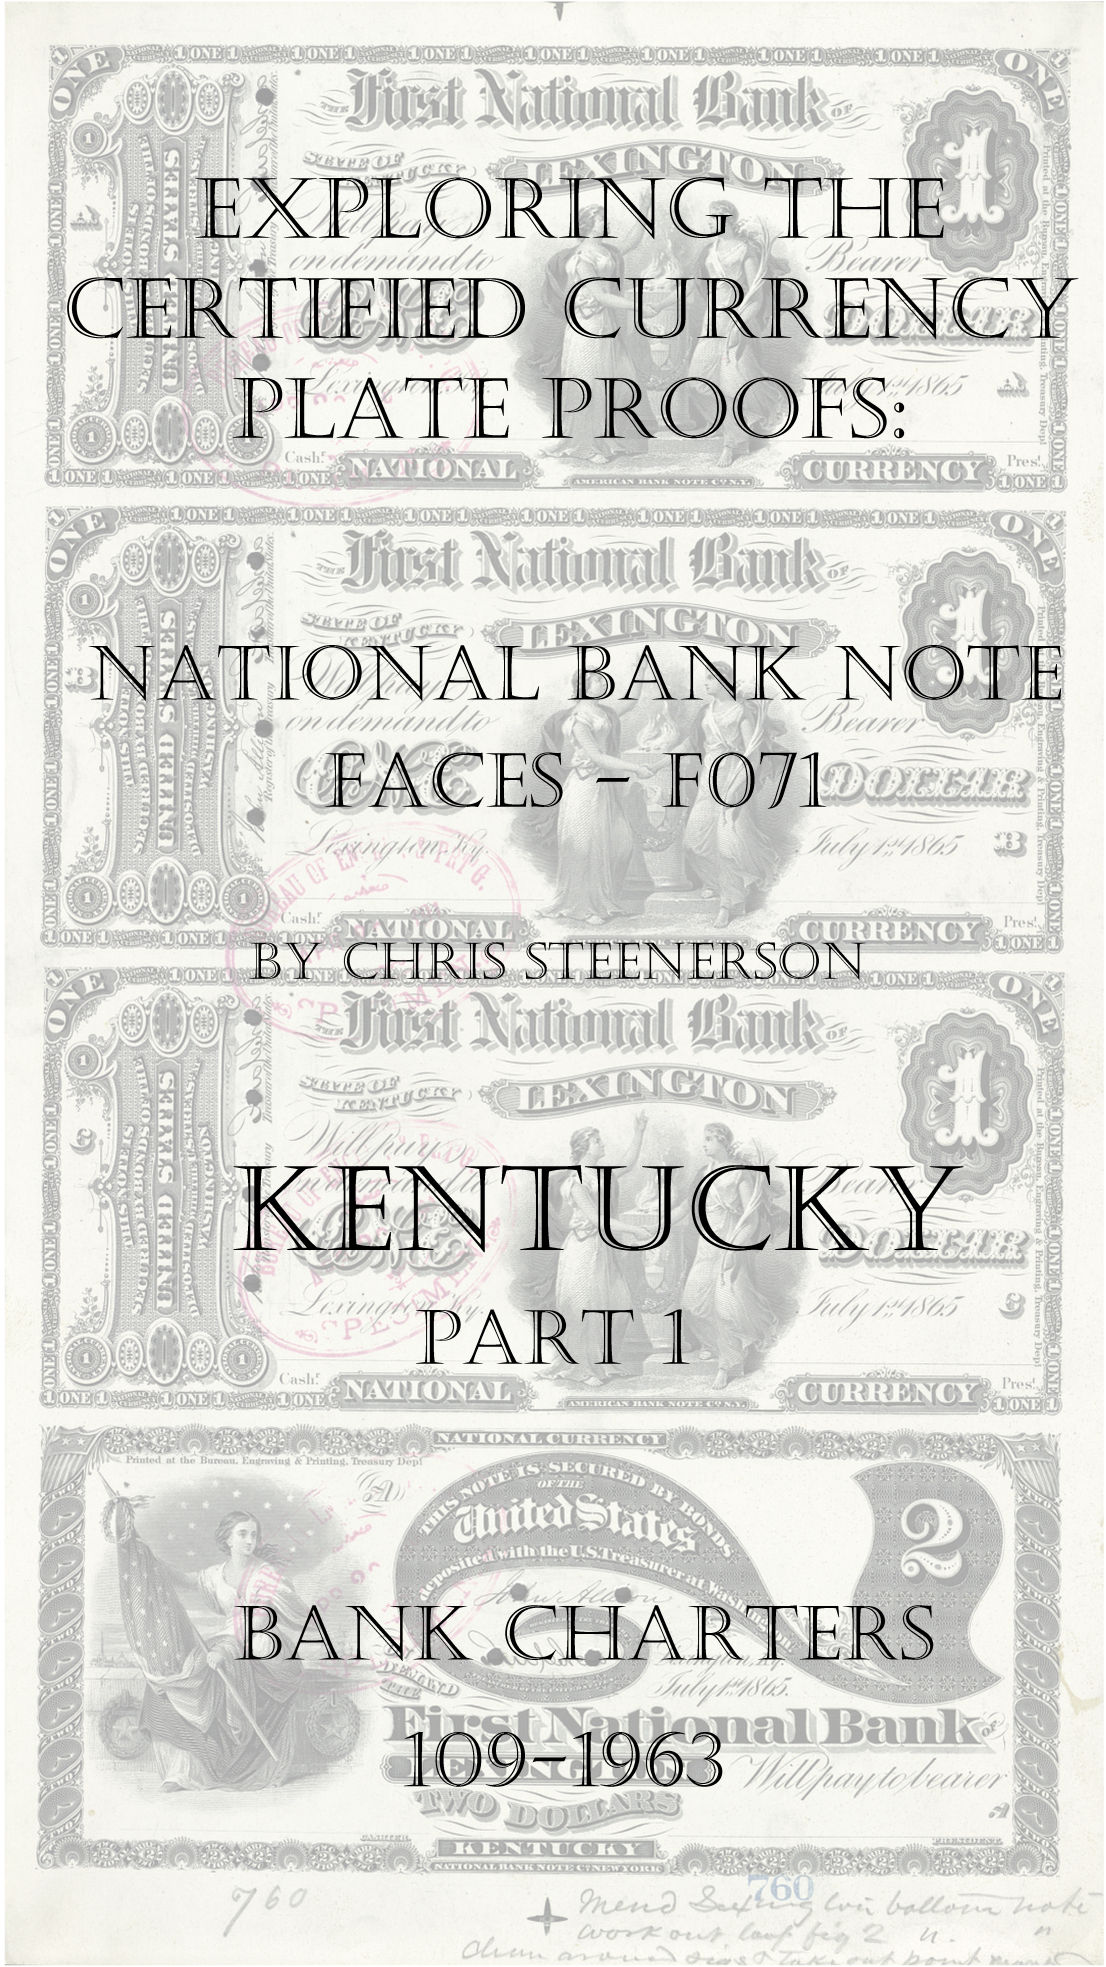 Kentucky National Bank Note Currency Proofs